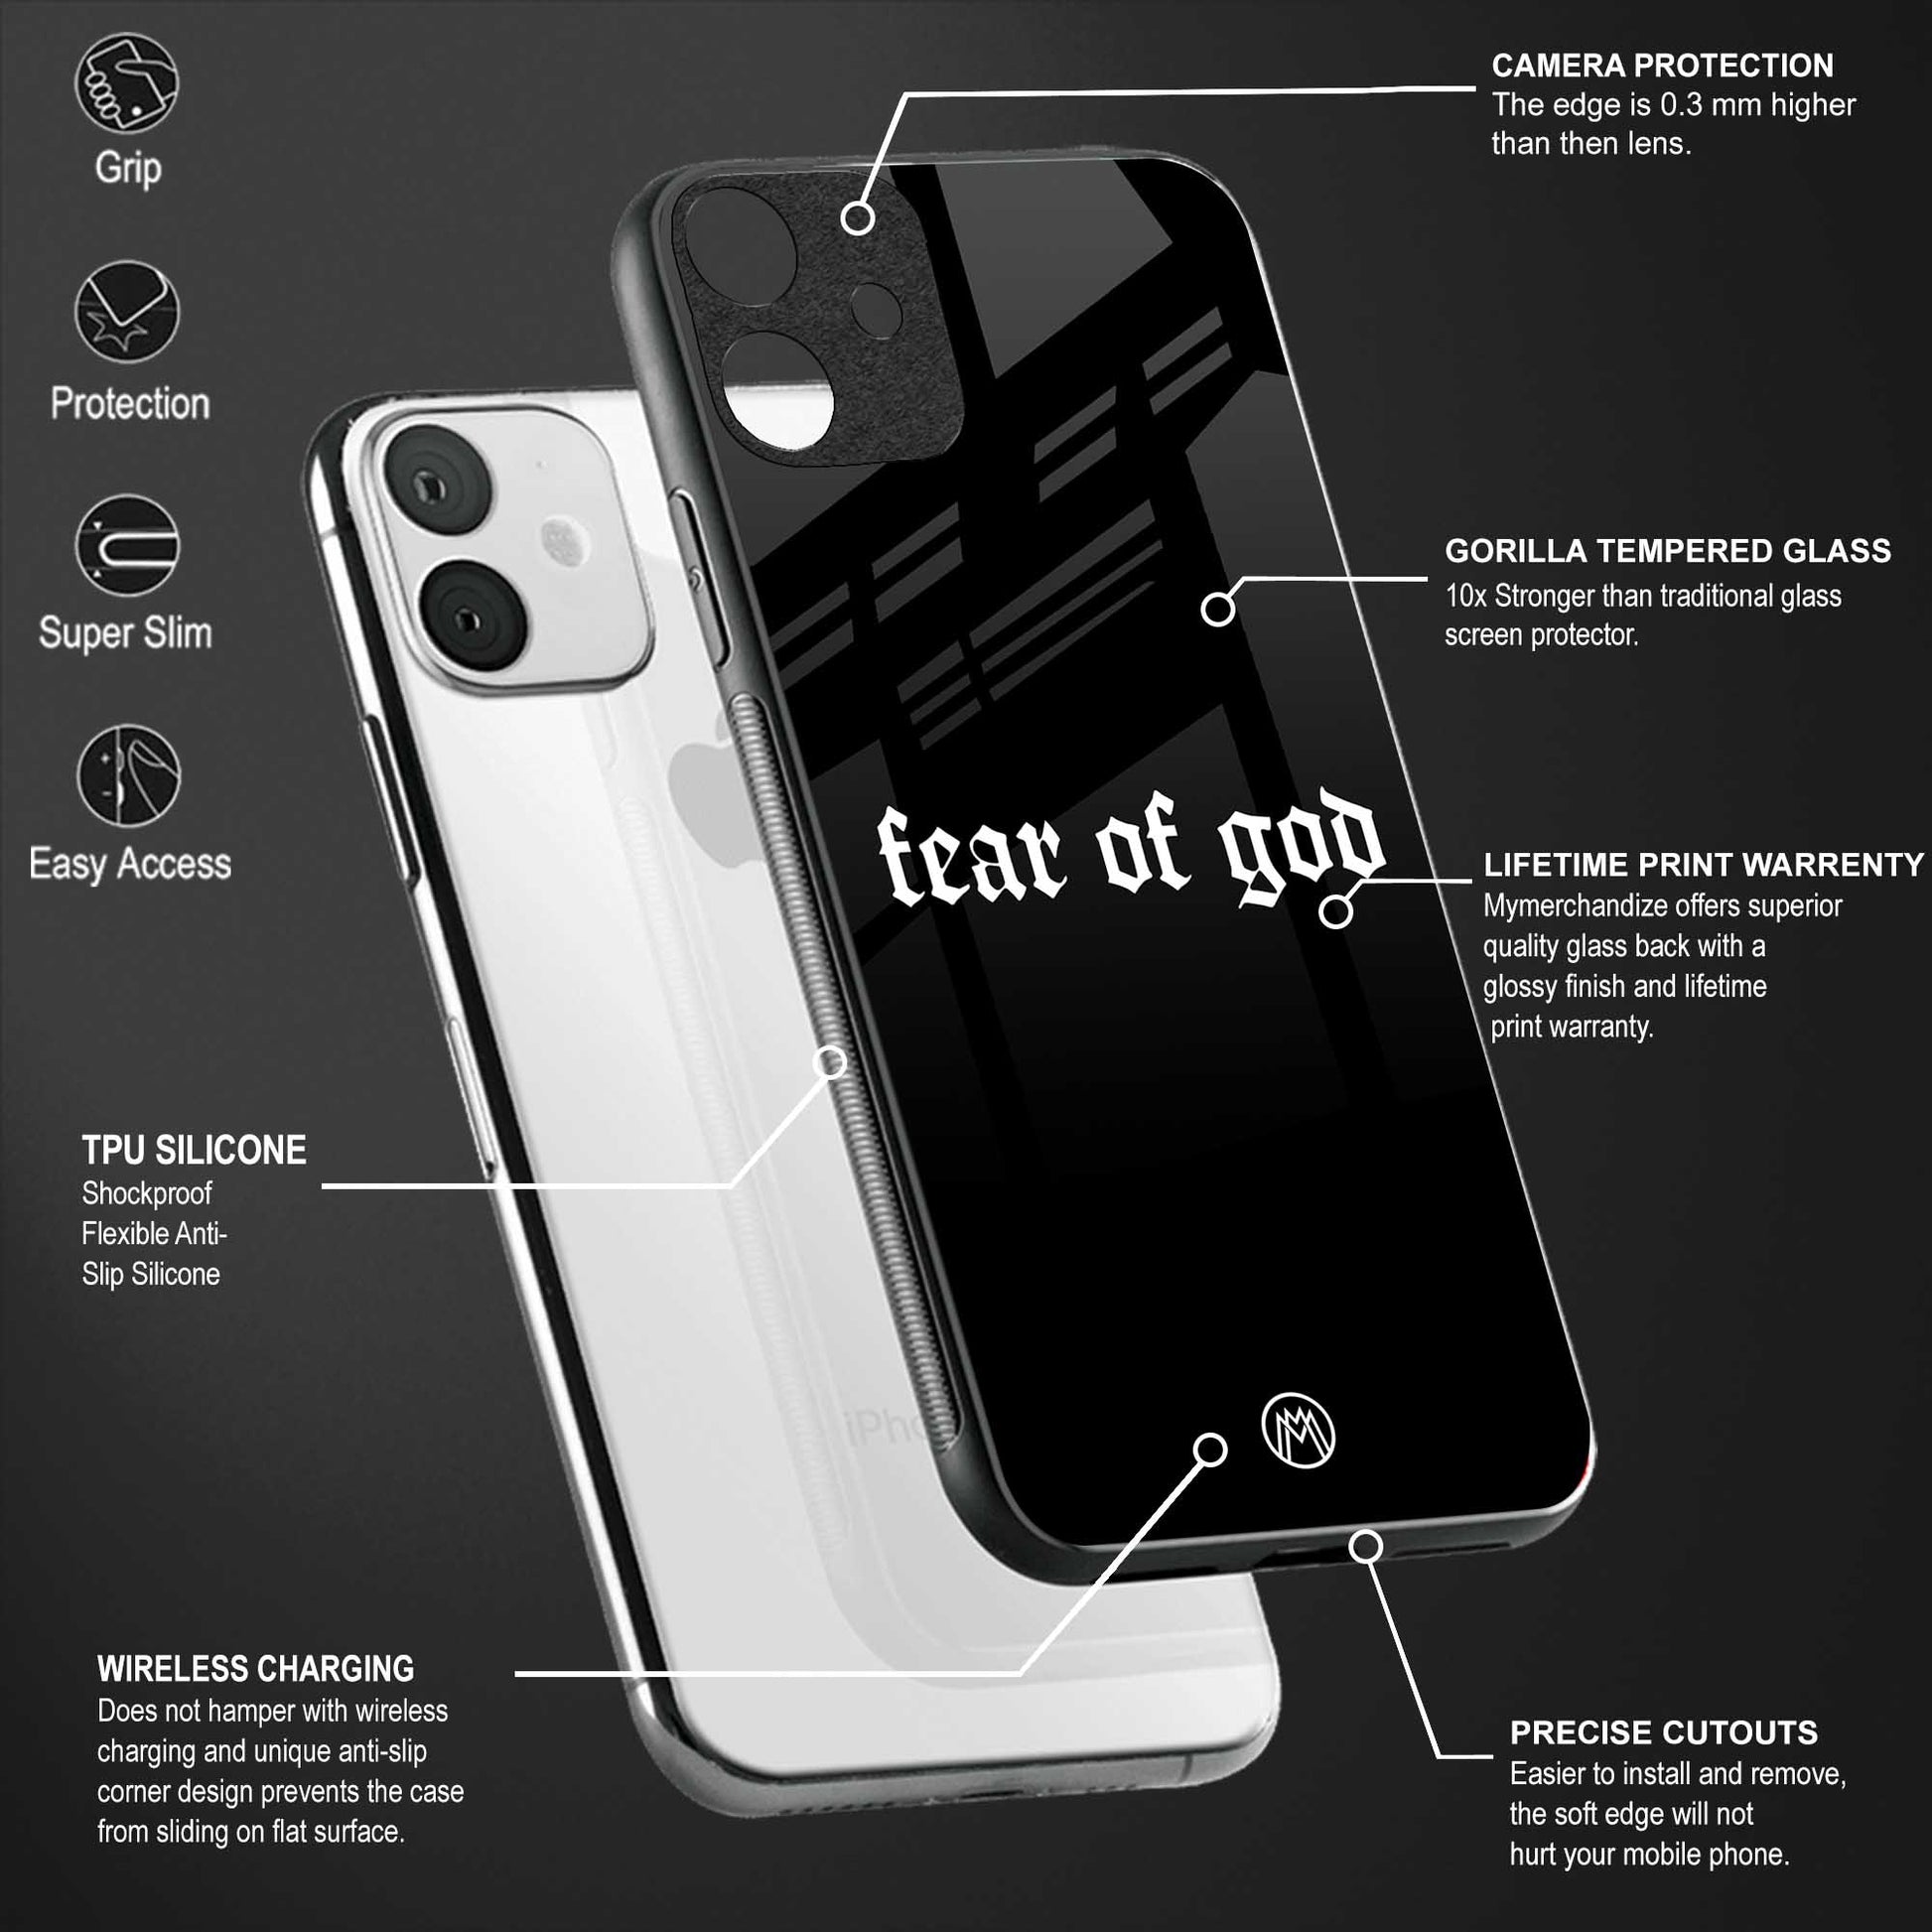 fear of god phone cover for oppo f19 pro